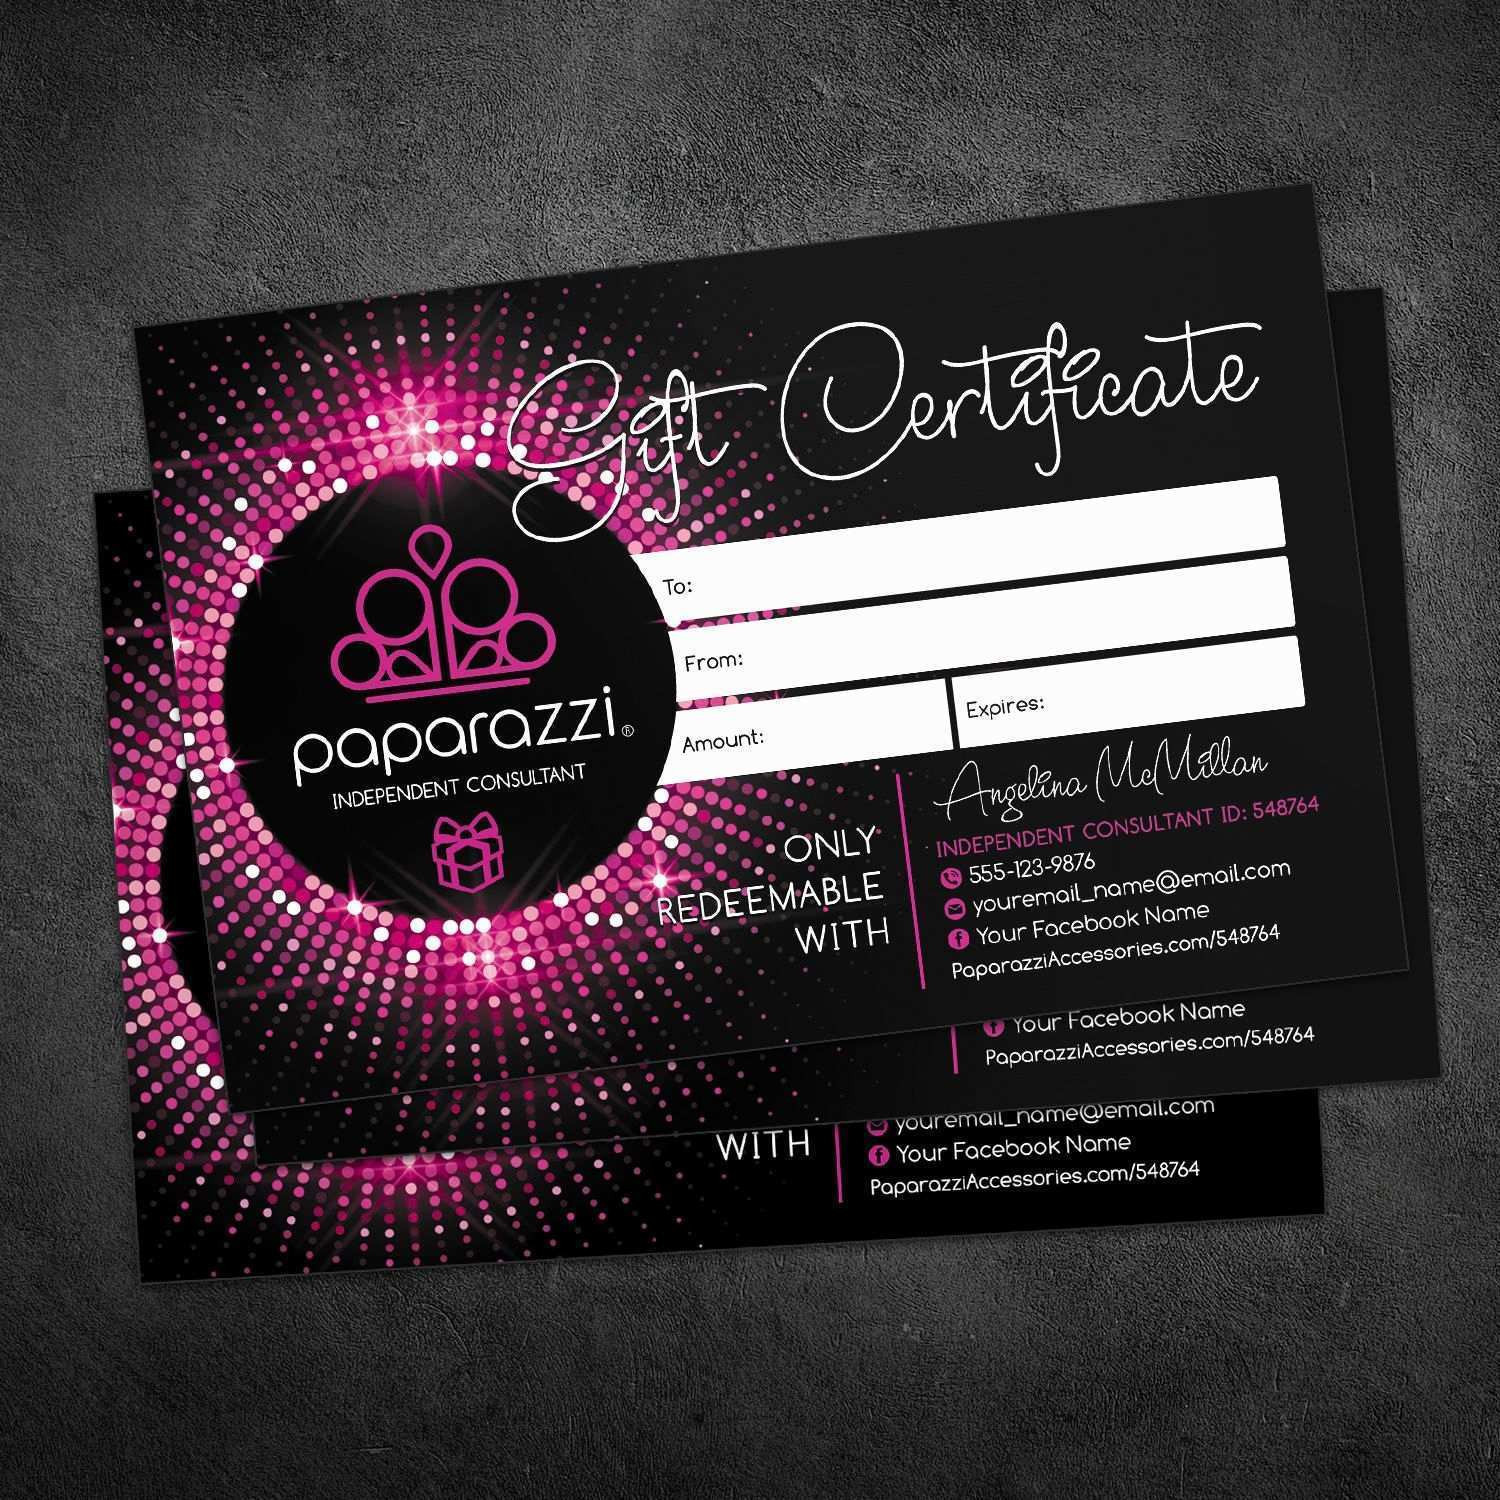 paparazzi accessories business card template inspirational jewelry business cards templates free paparazzi card template of paparazzi accessories business card template